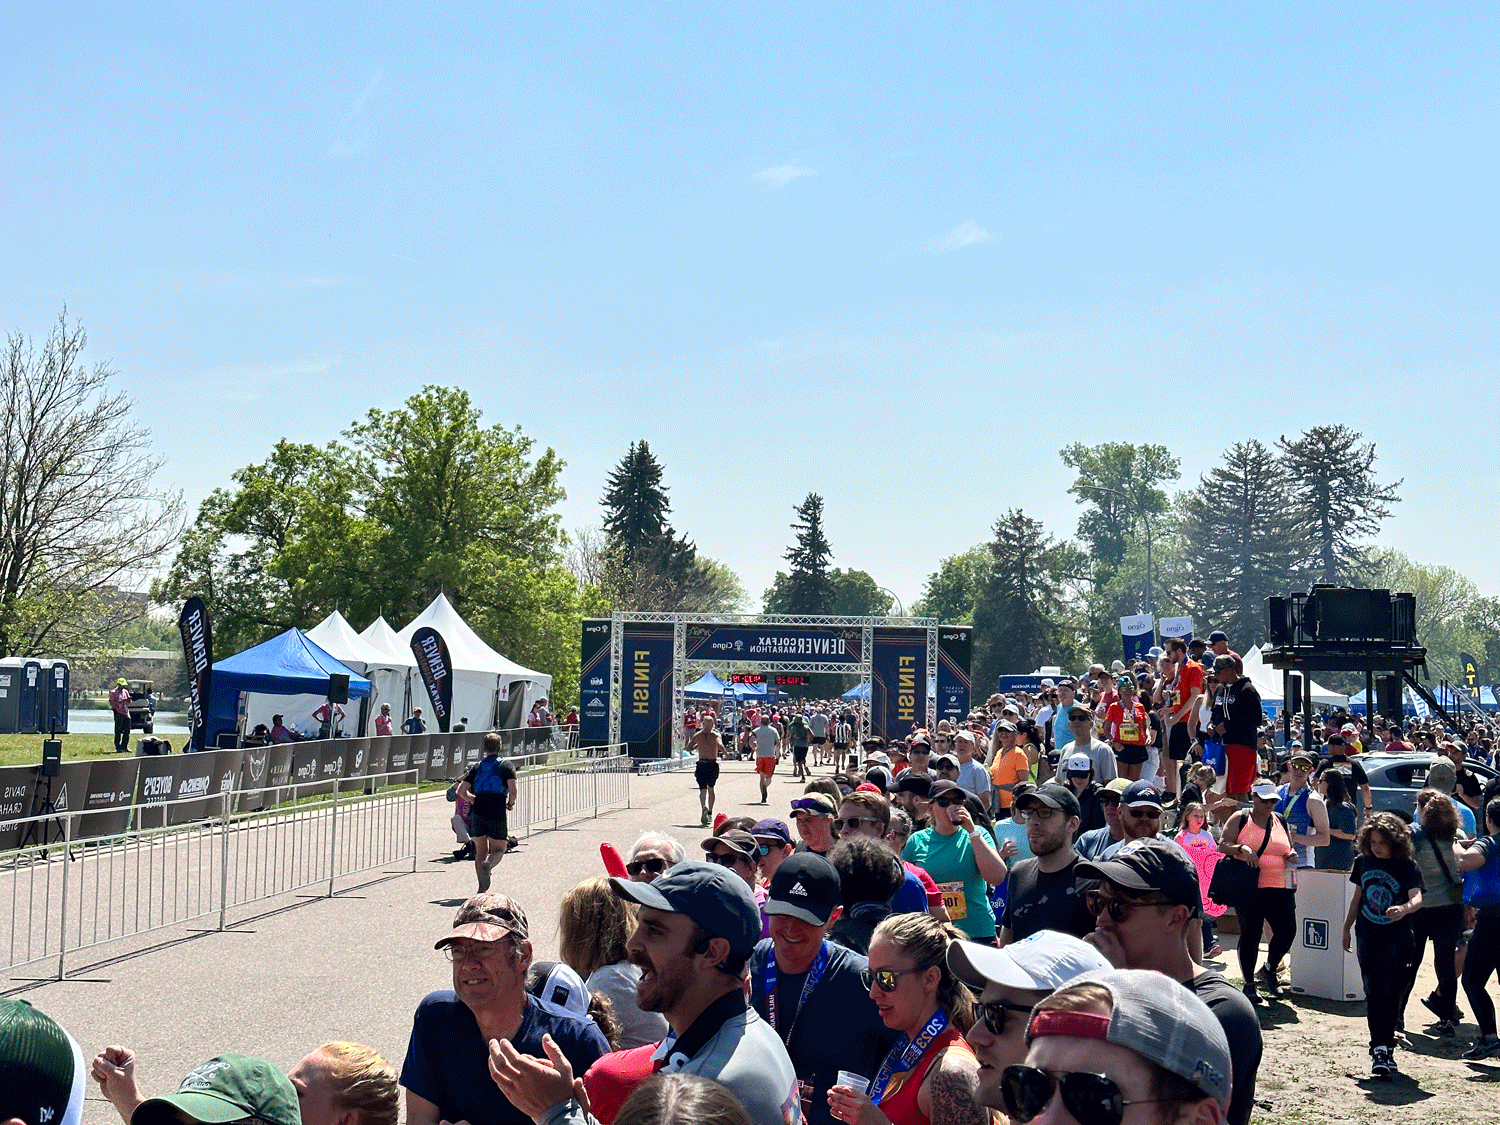 Runners crossing the finish line in front of a large crowd at the 2023 丹佛 Colfax Marathon